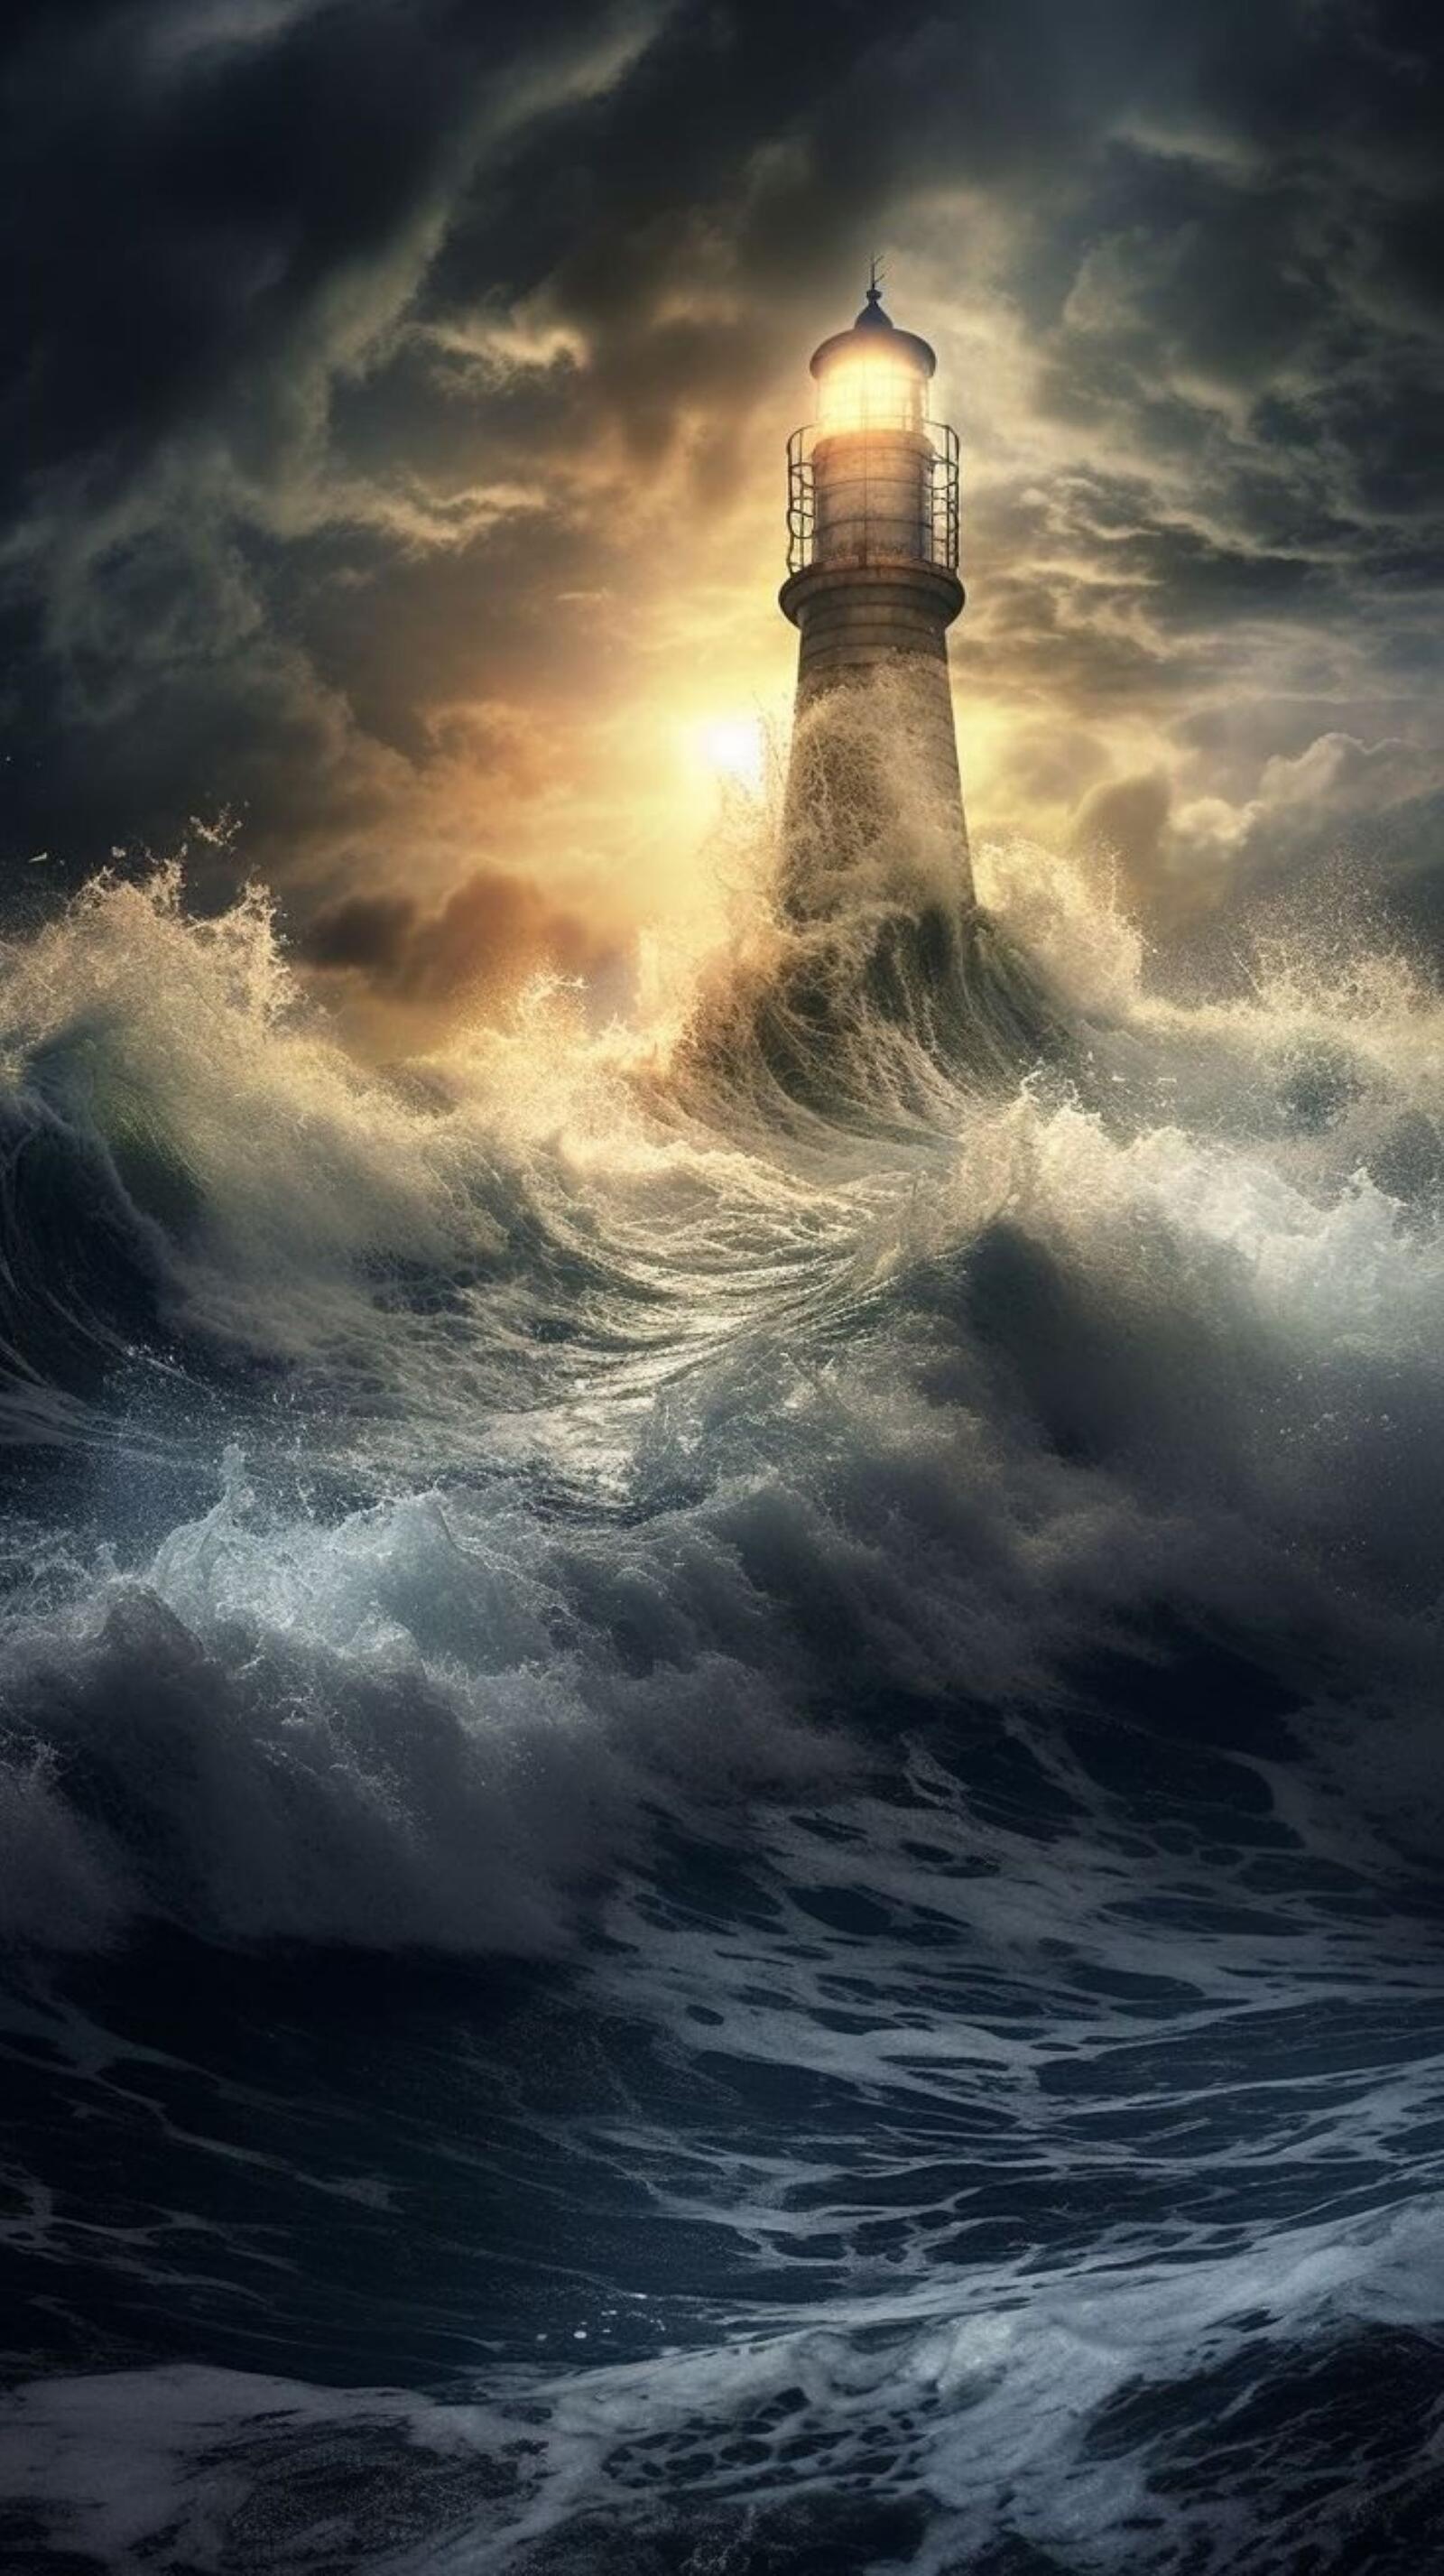 Free photo A lighthouse in a raging ocean